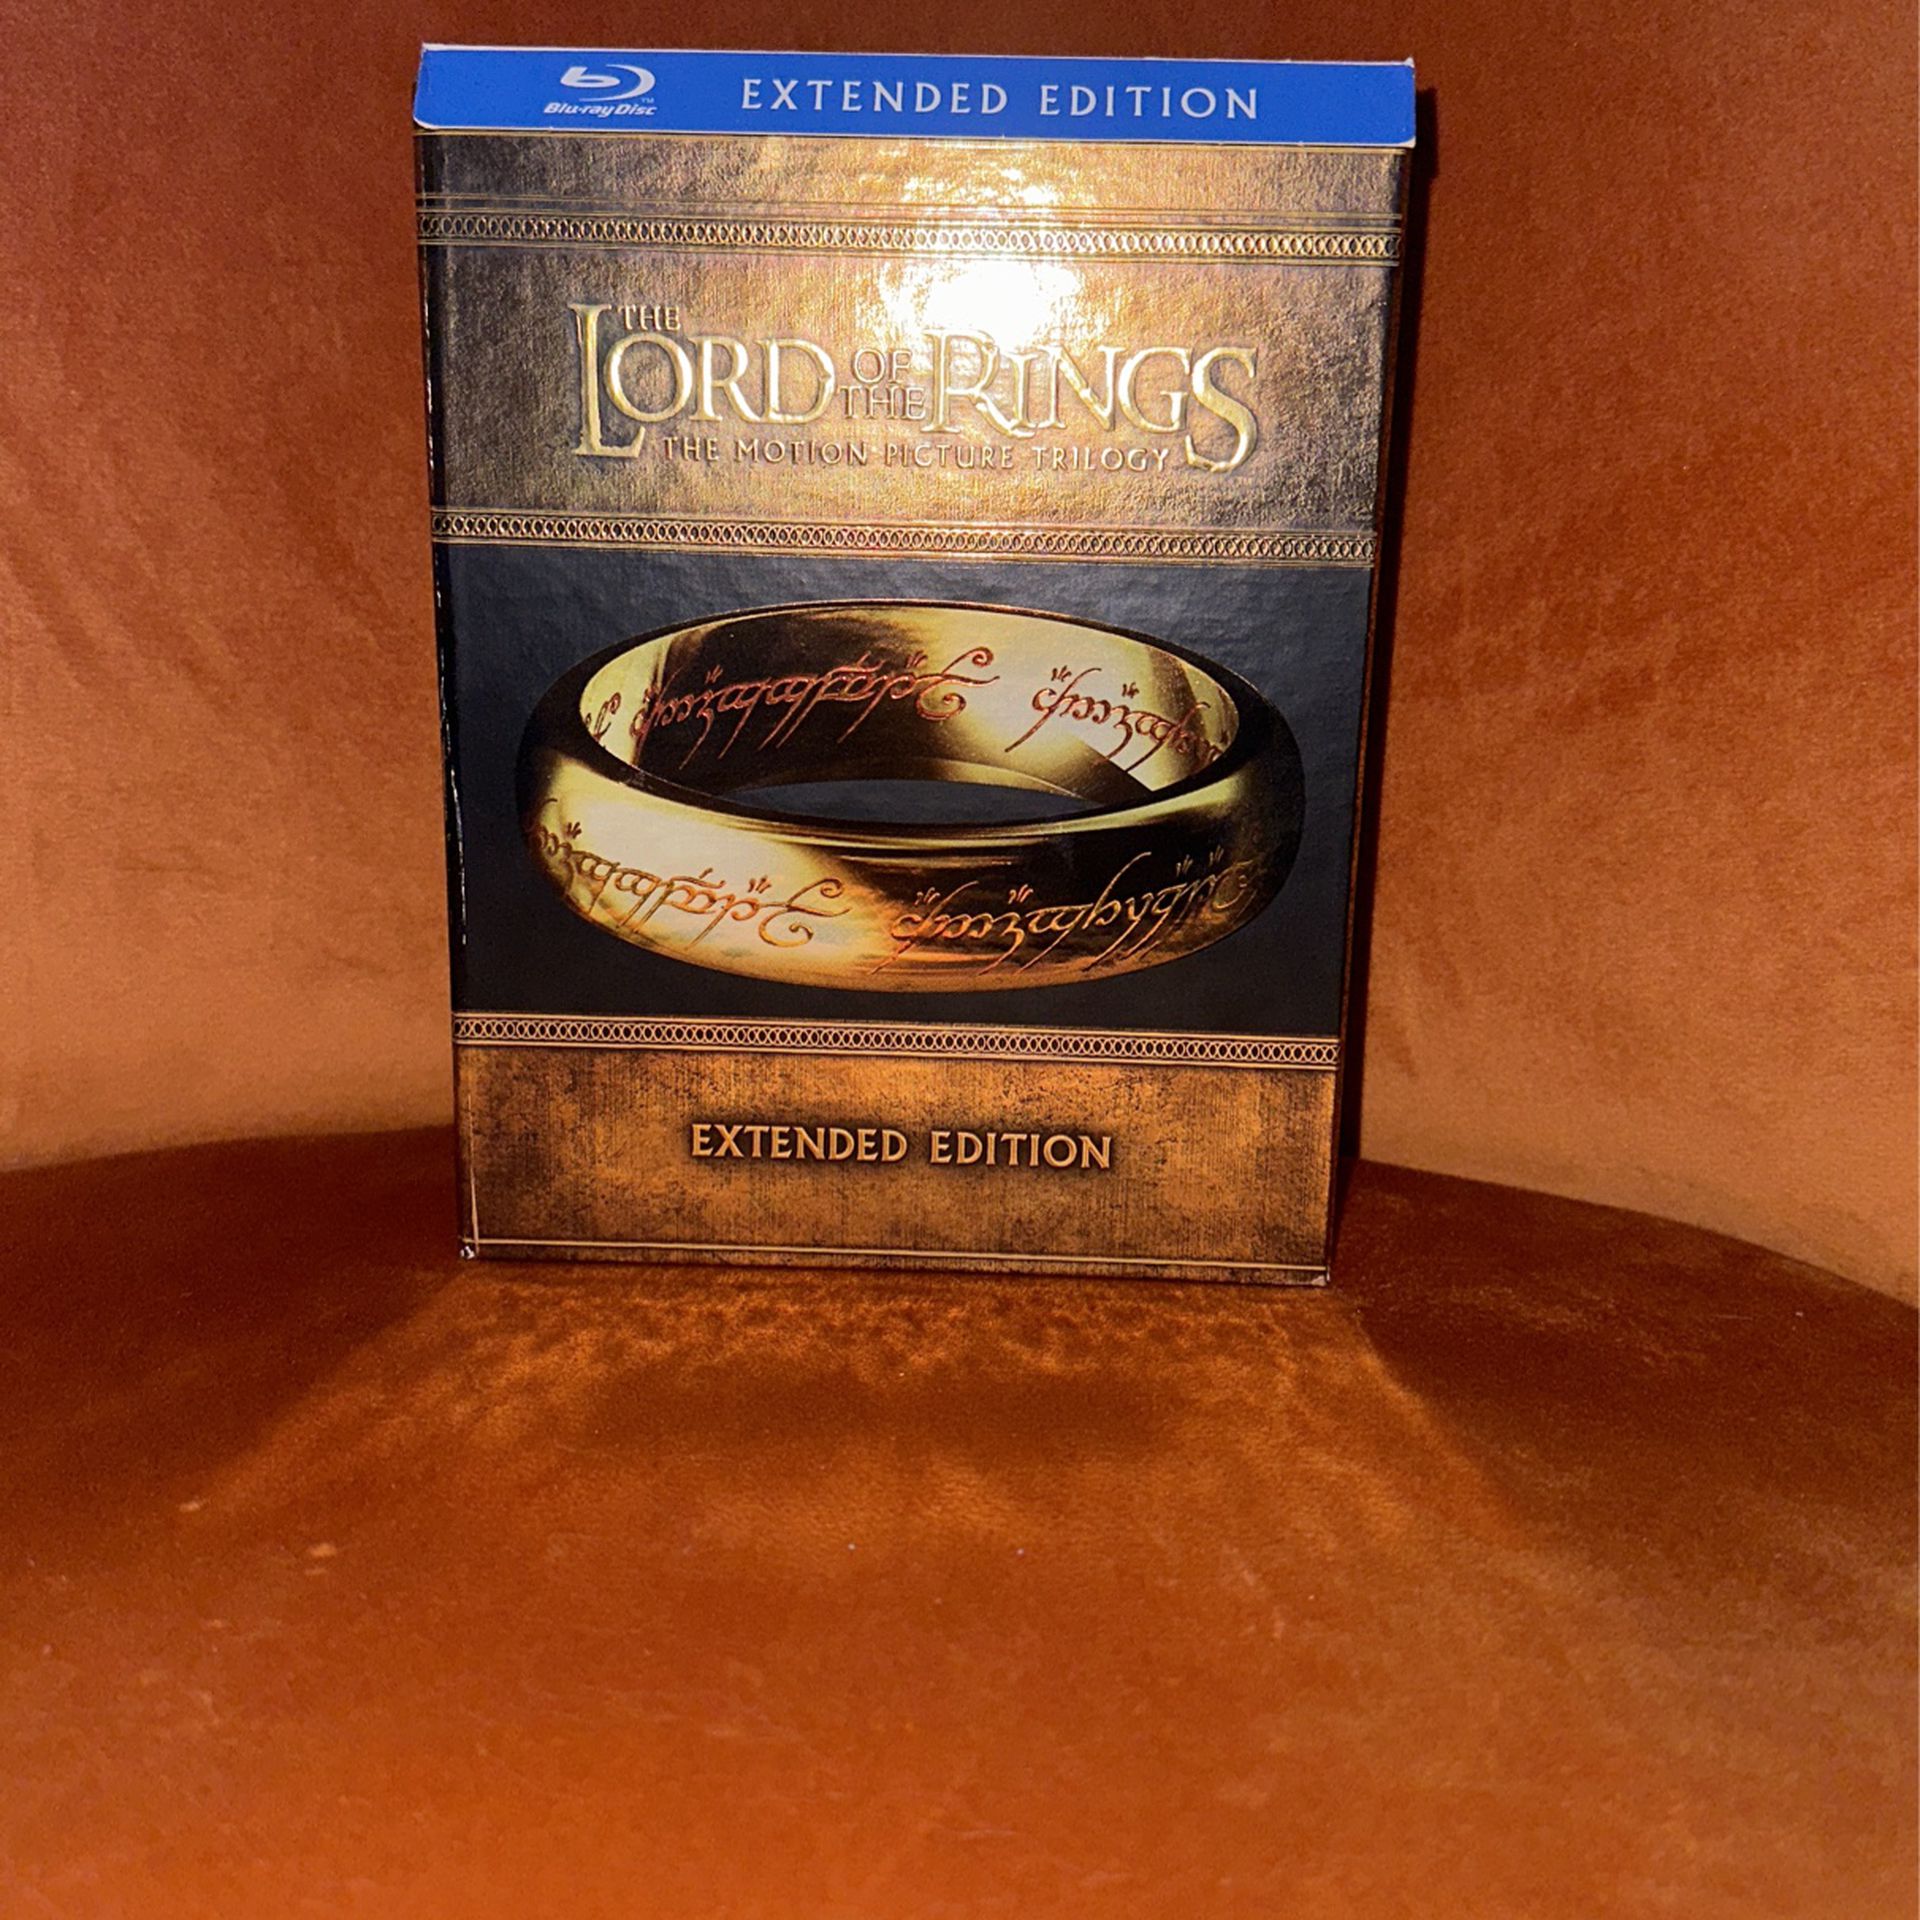 WOW LOOK AT ME, LOOK 👀 The Lord Of The Rings Limited Edition Blu-ray Box Set